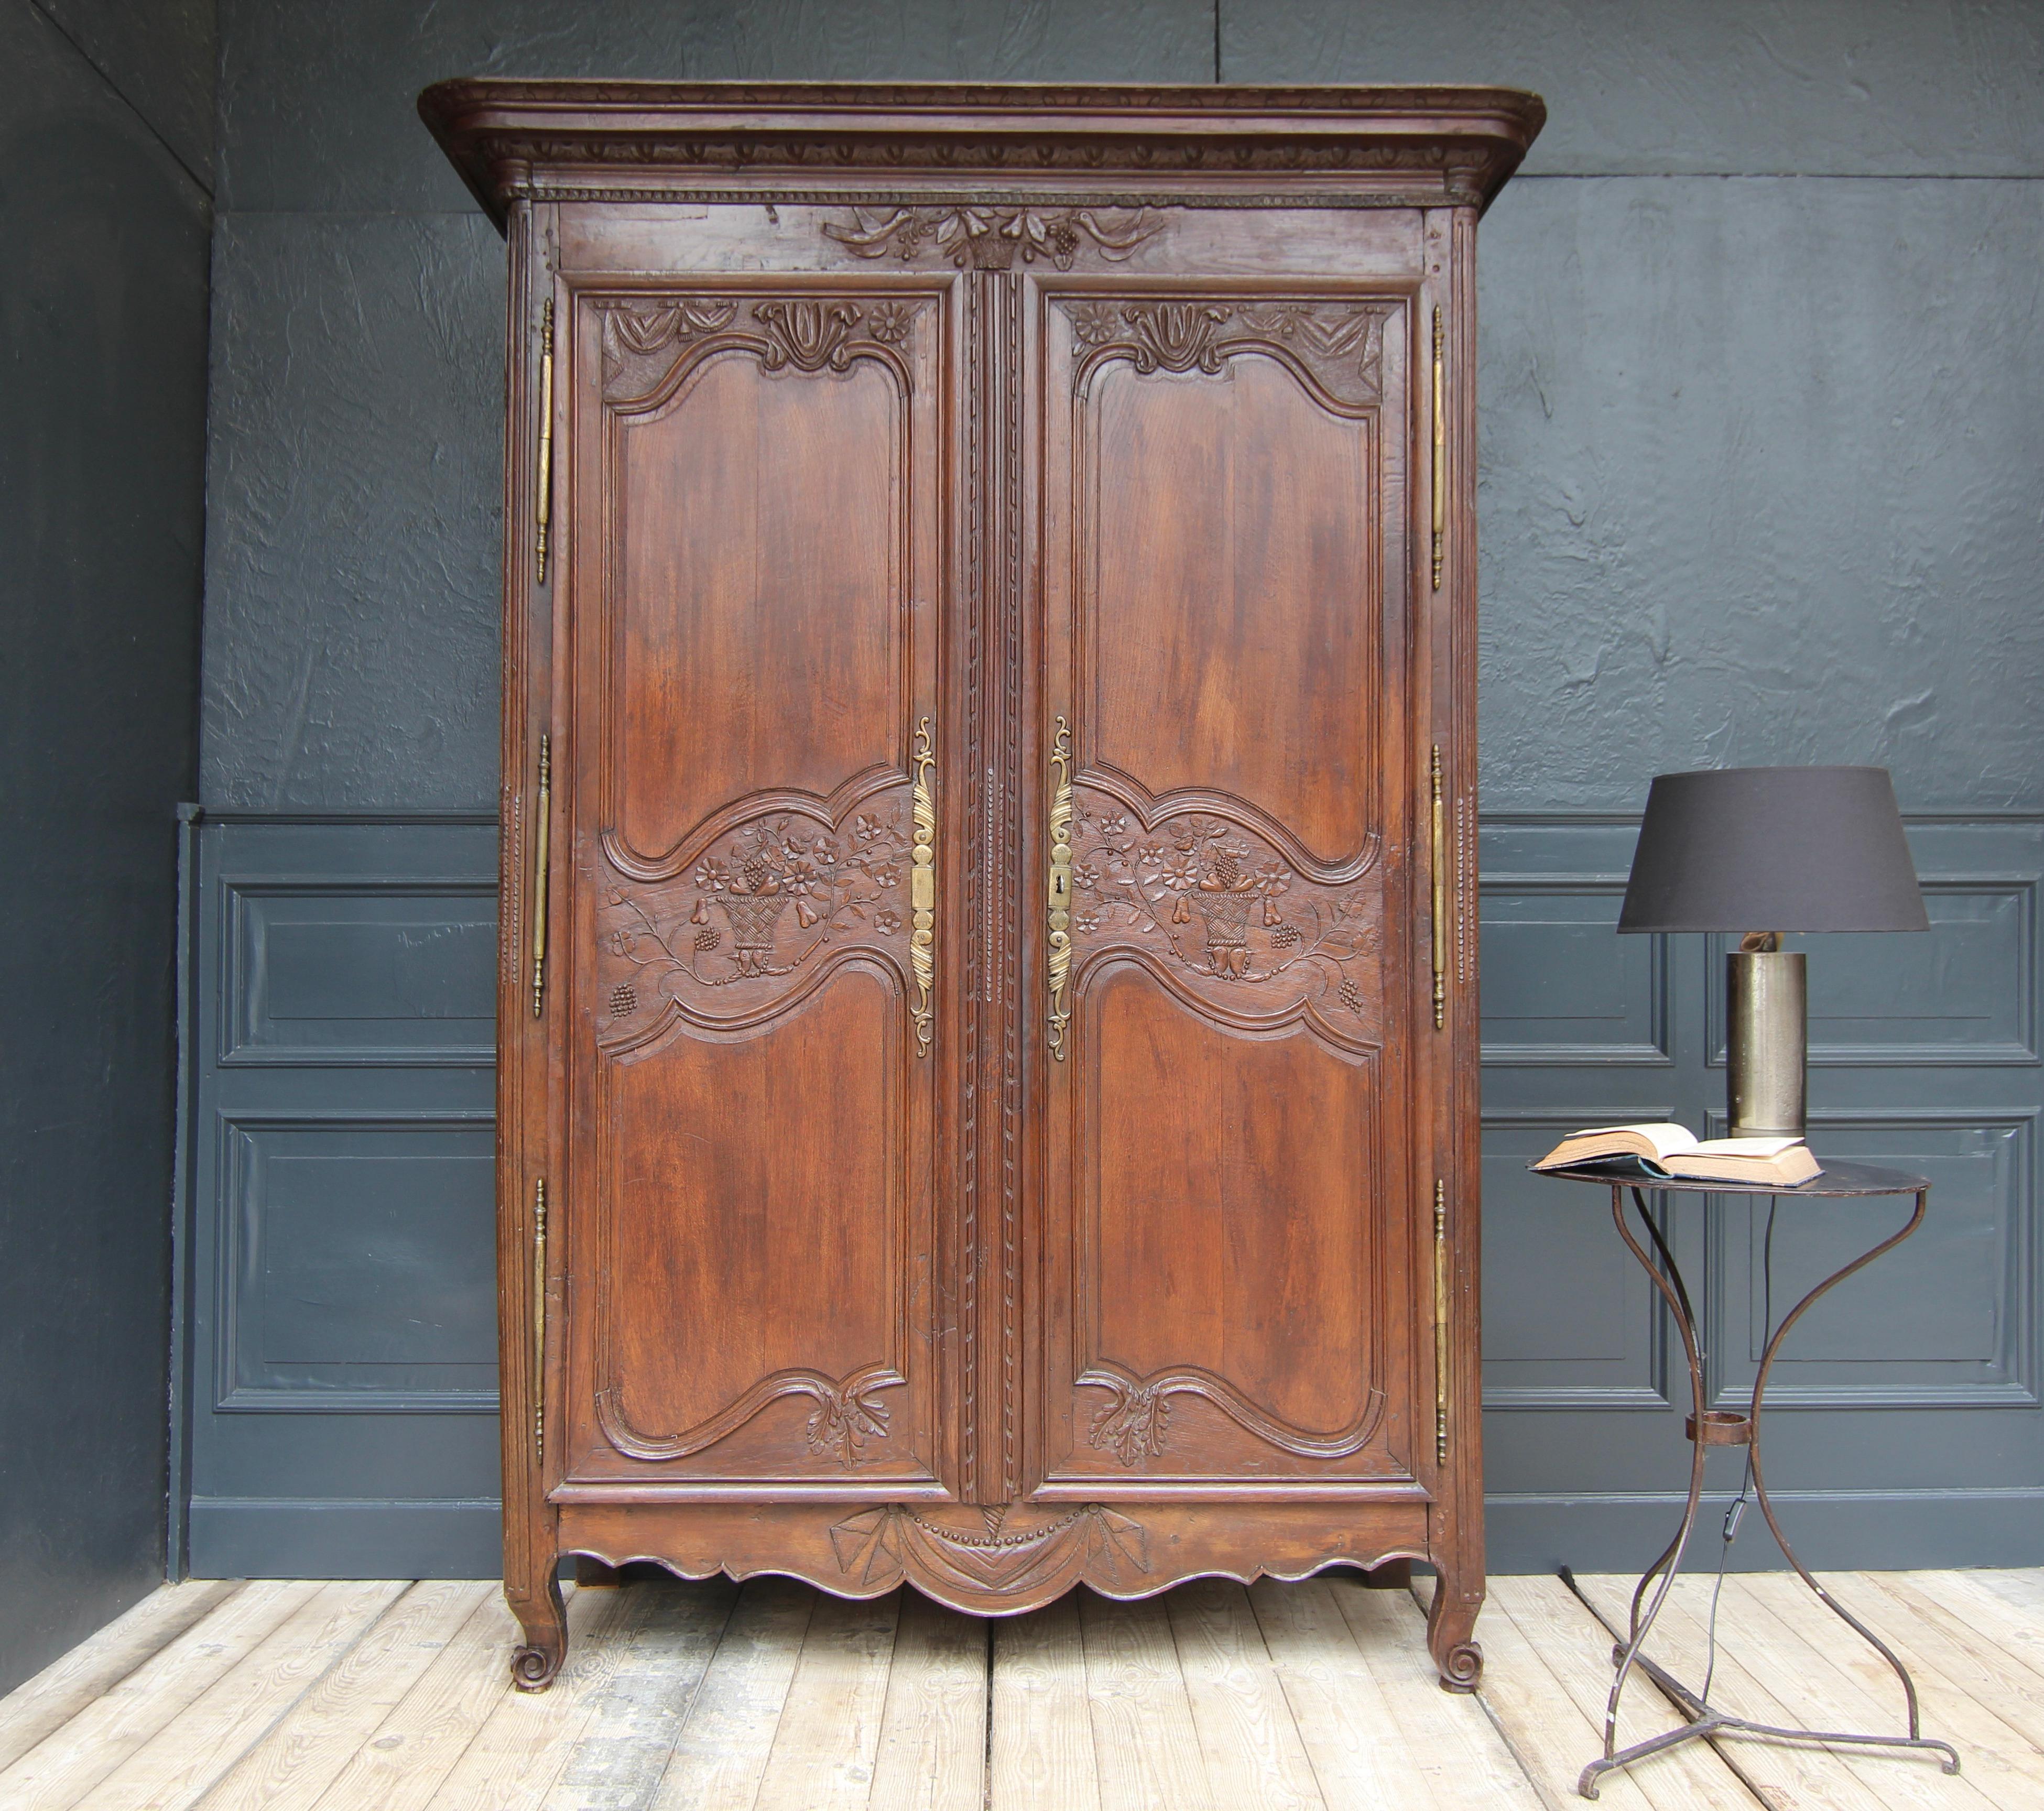 A french provincial cabinet or armoire, so-called wedding cabinet. Normandy, end of the 18th century. Solidly made in oak with beautiful carvings. 

Traditionally in the 18th century, cabinets of this type were brought into marriage as a dowry for